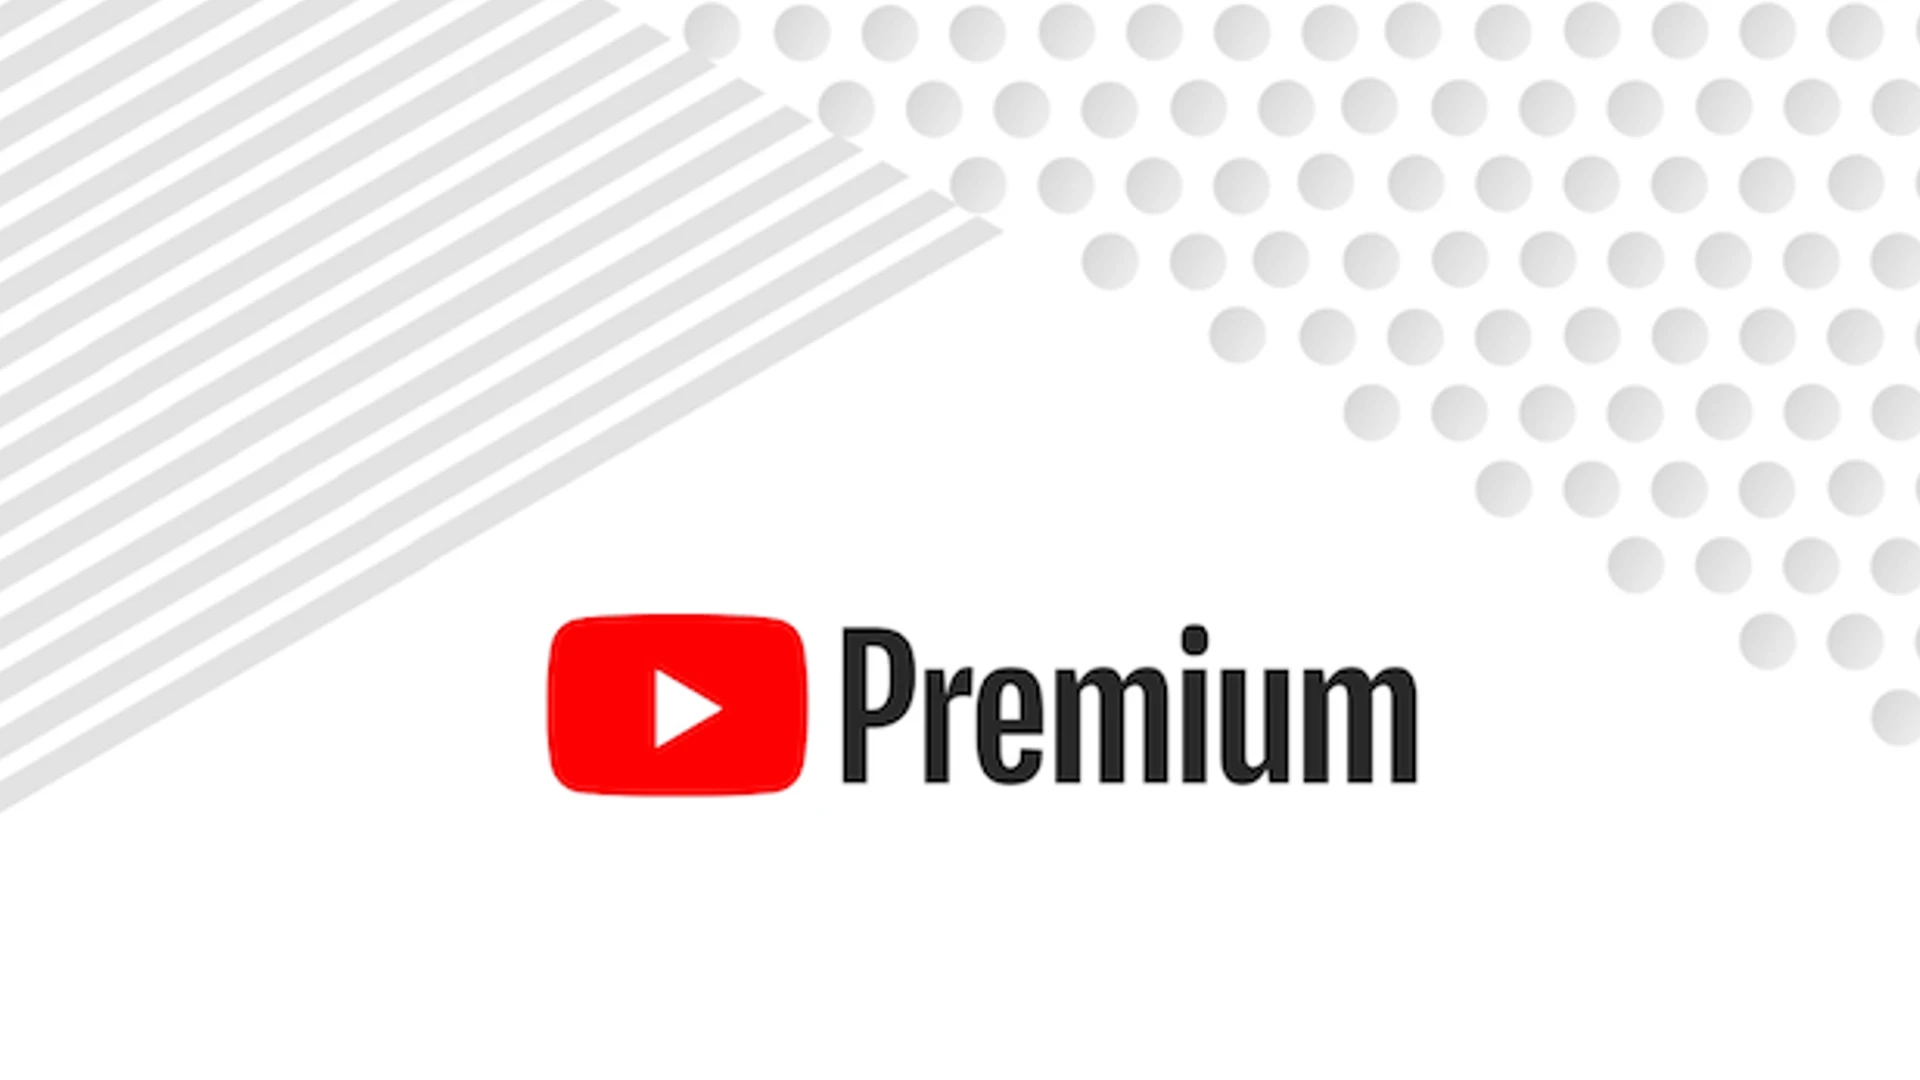 YouTube Premium Individual Plan Price Increases to $13.99 for US Subscribers